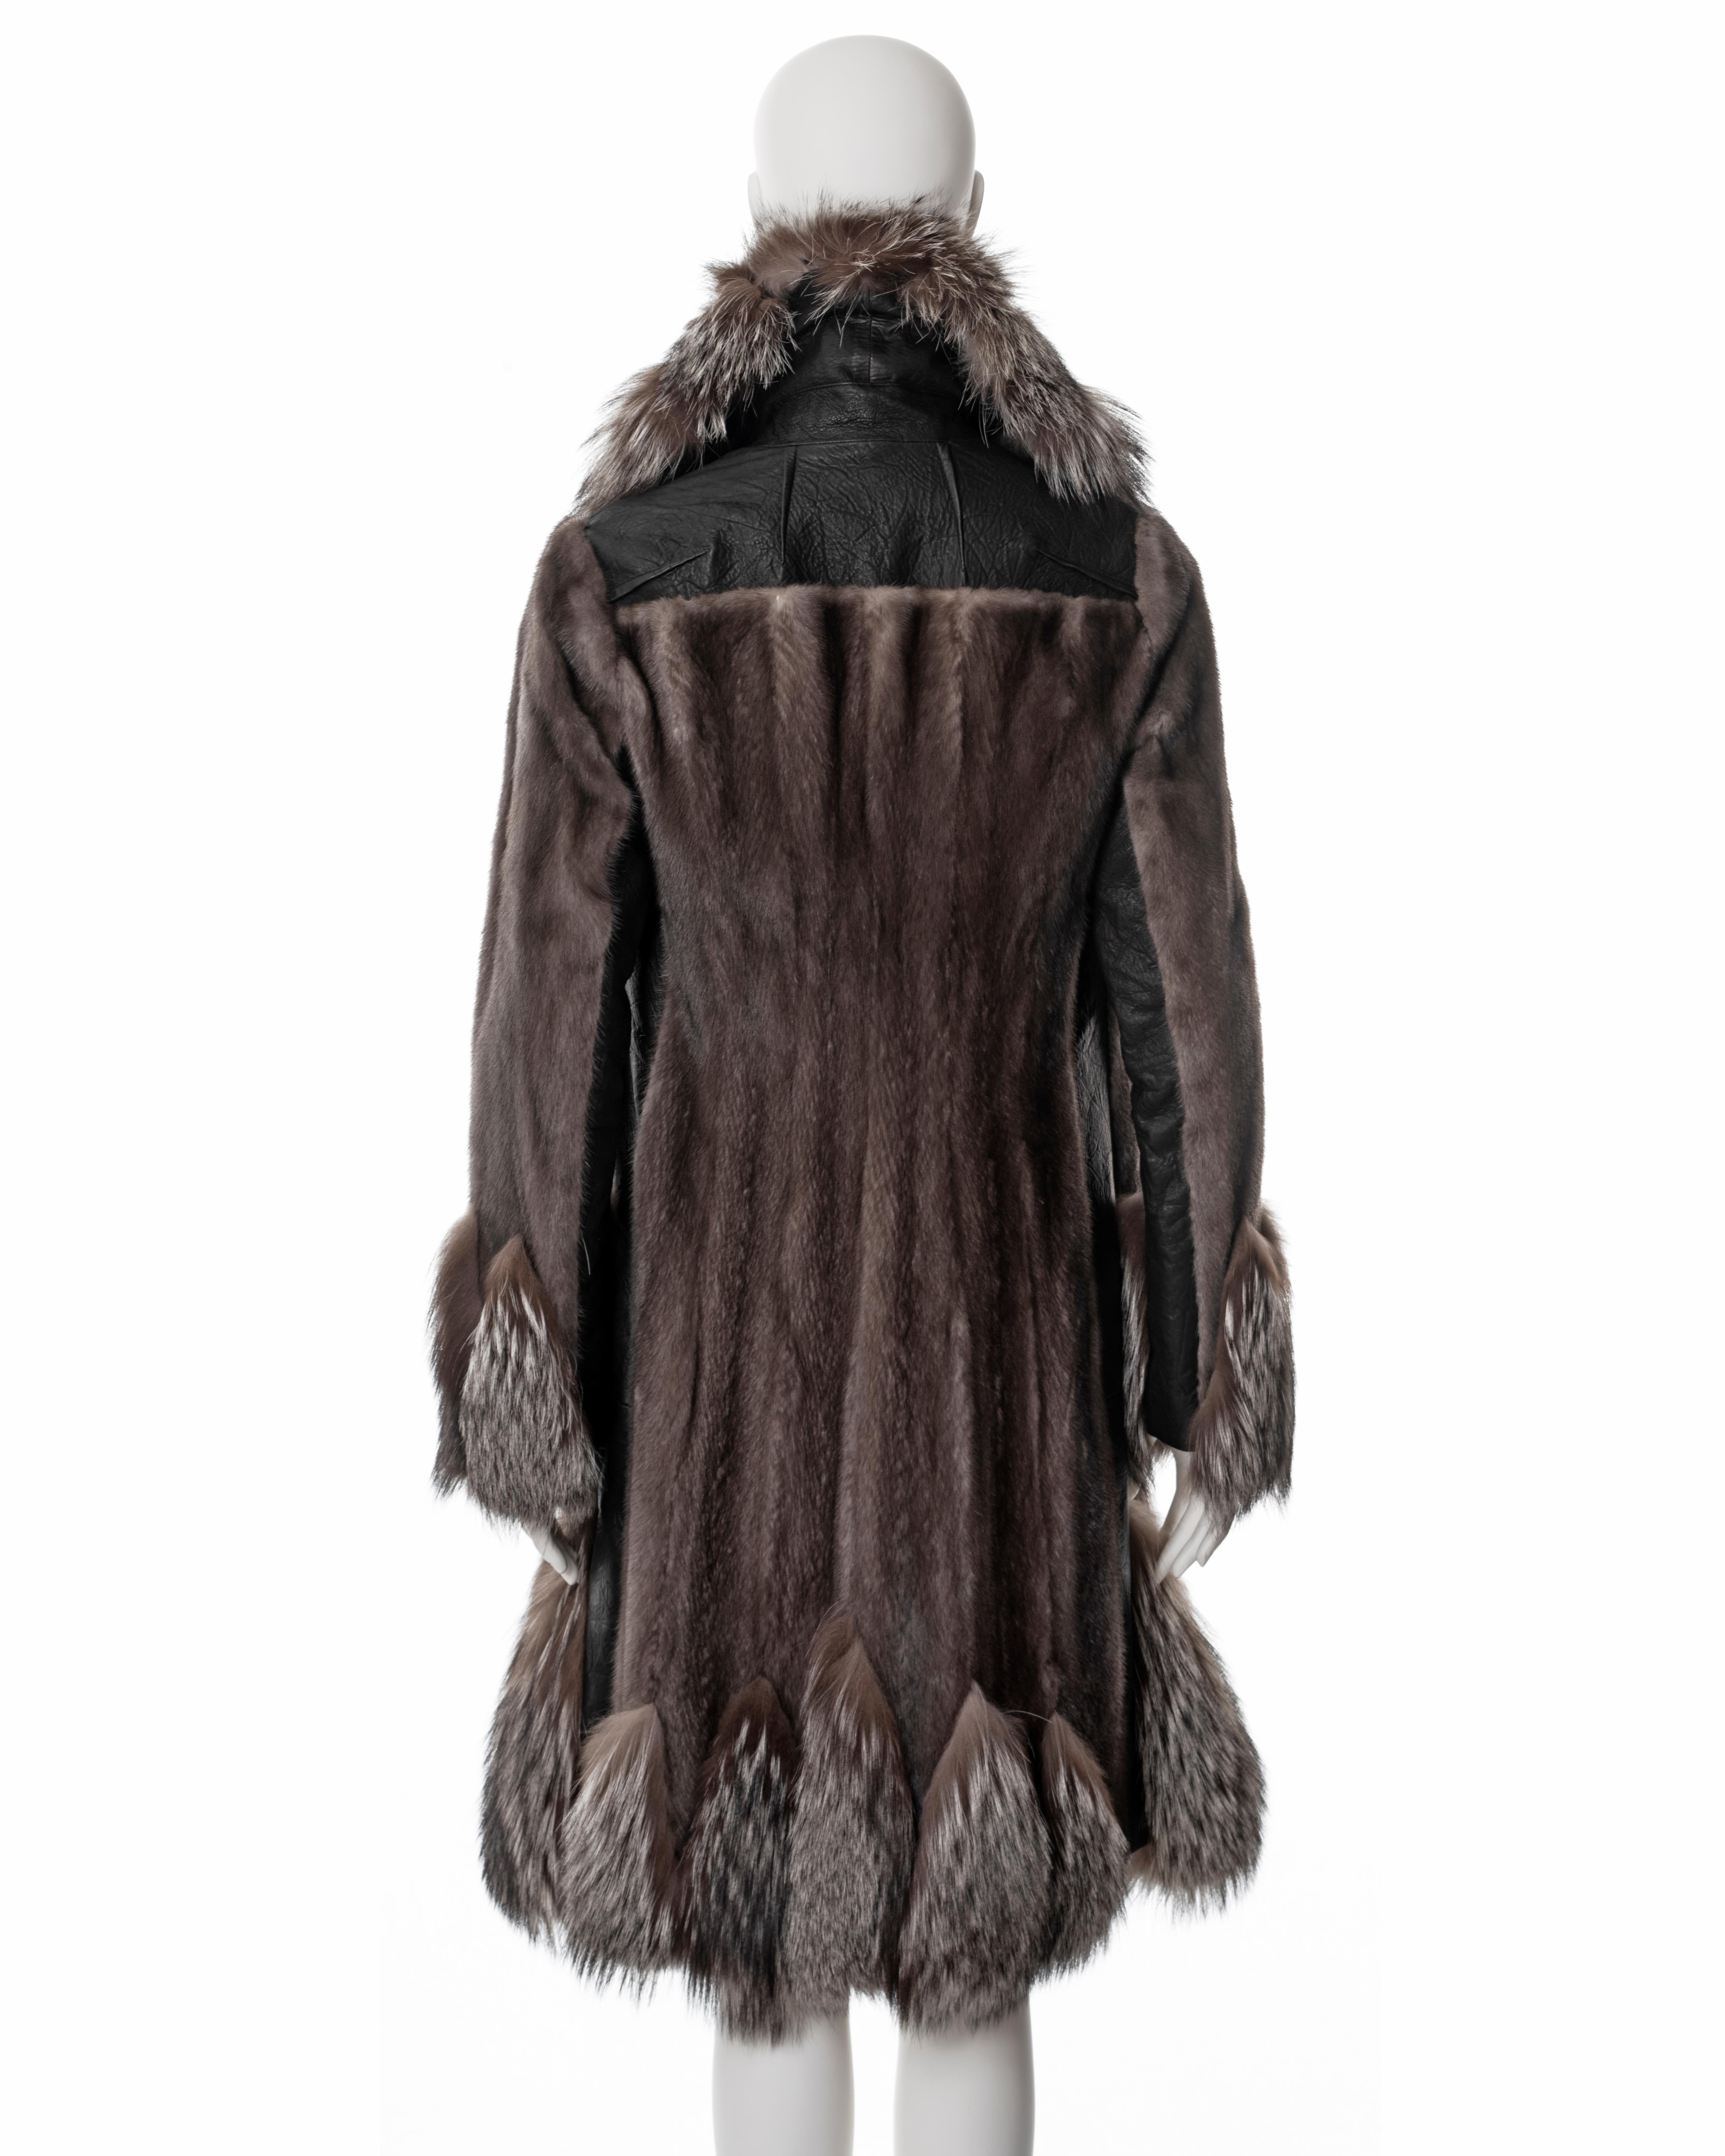 Christian Dior by John Galliano silverblue mink and silver fox fur coat, fw 2006 For Sale 2